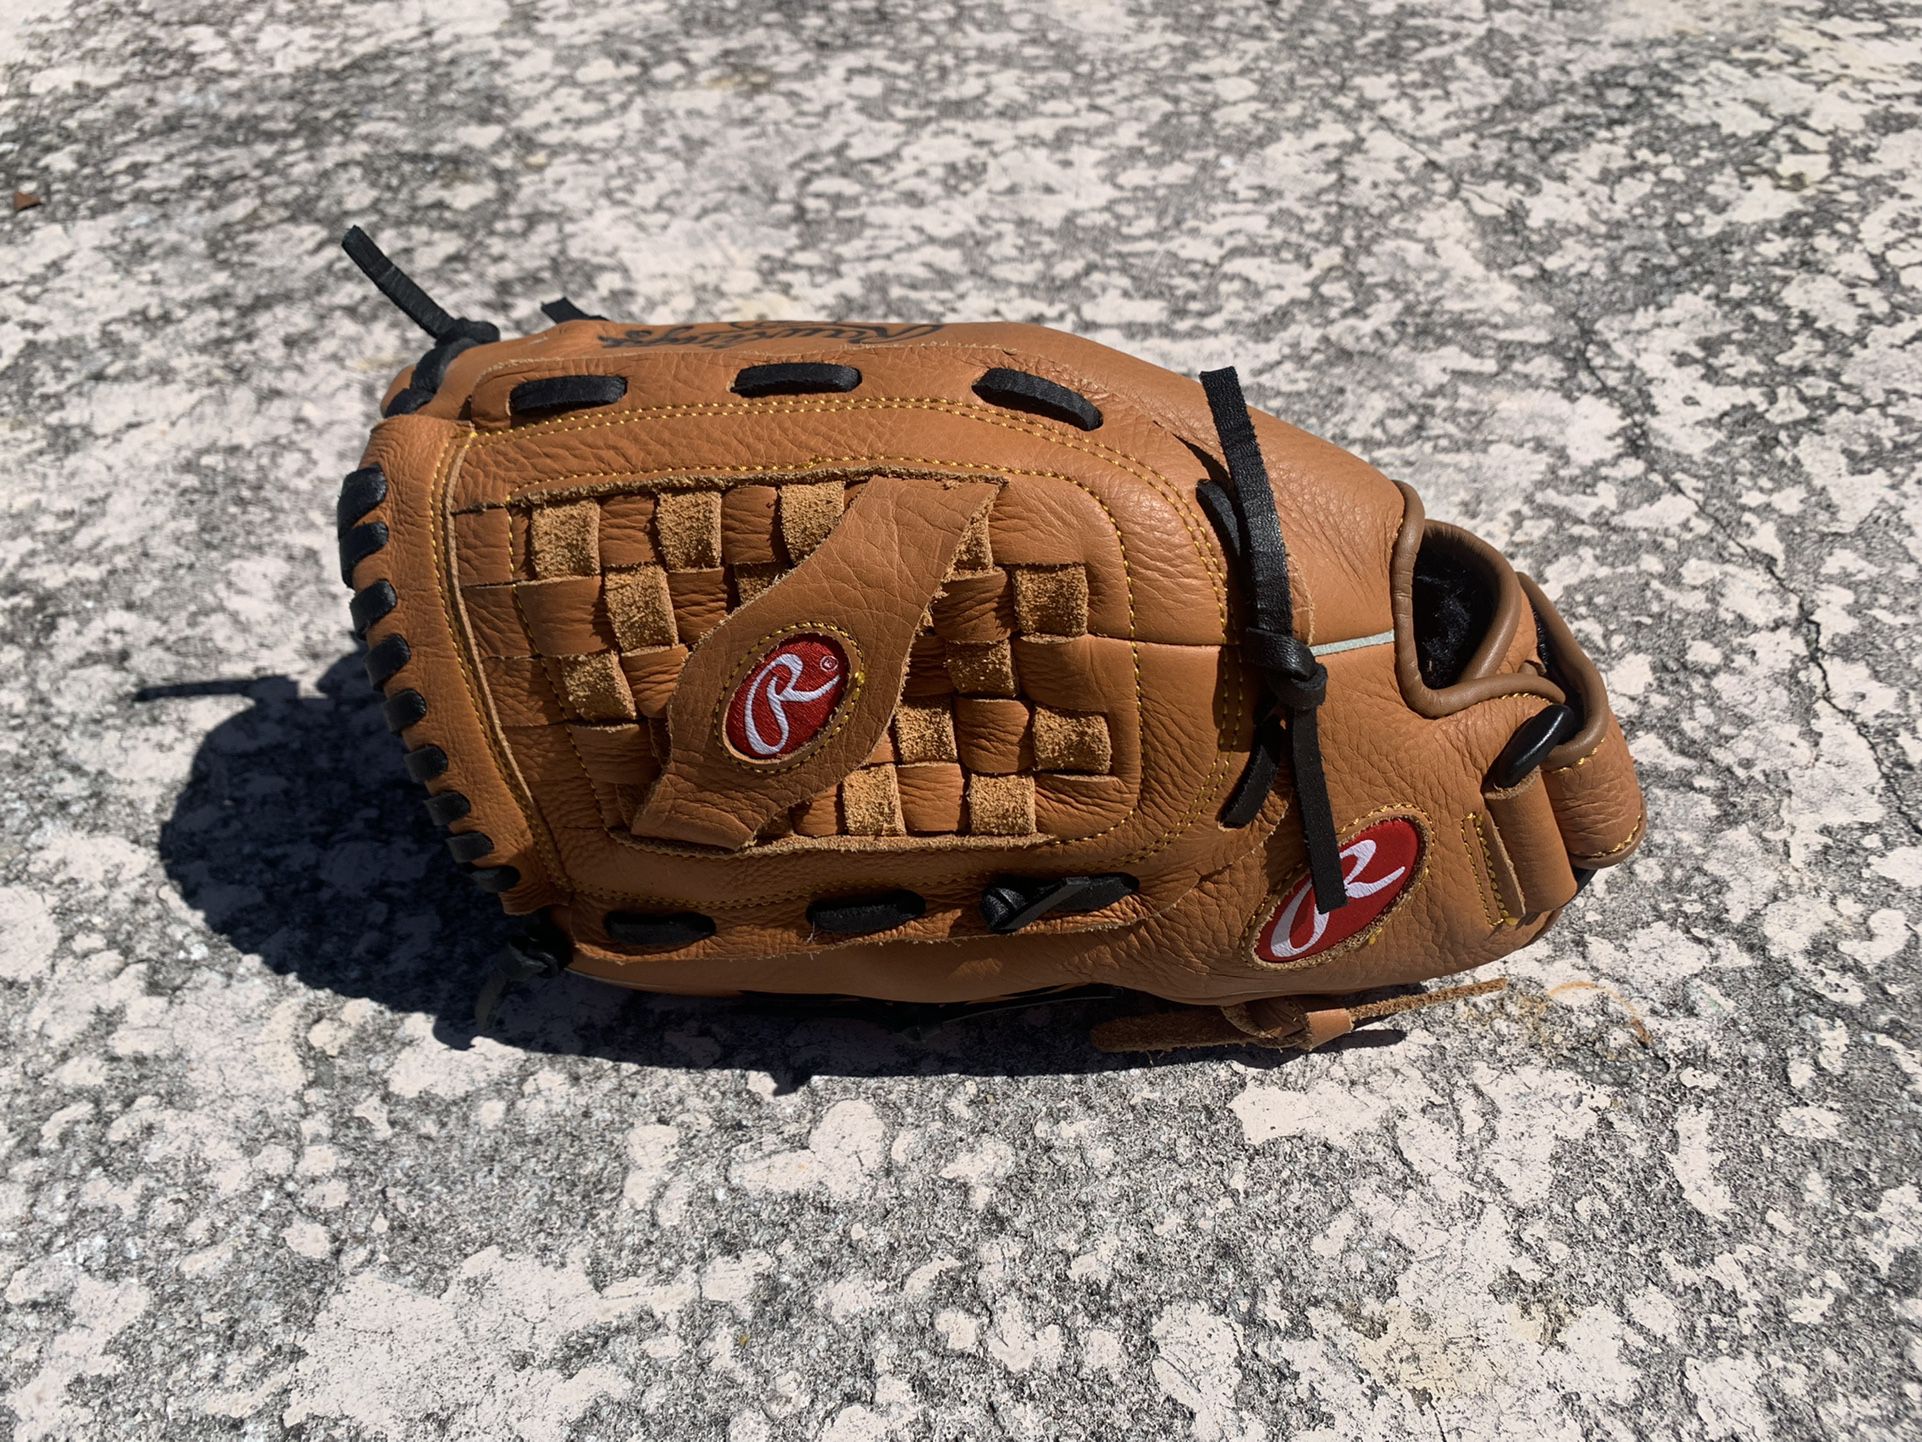 Excellent Condition Rawlings Select Series 13”  Softball Baseball Glove LHT Left Hand Throw Lefty